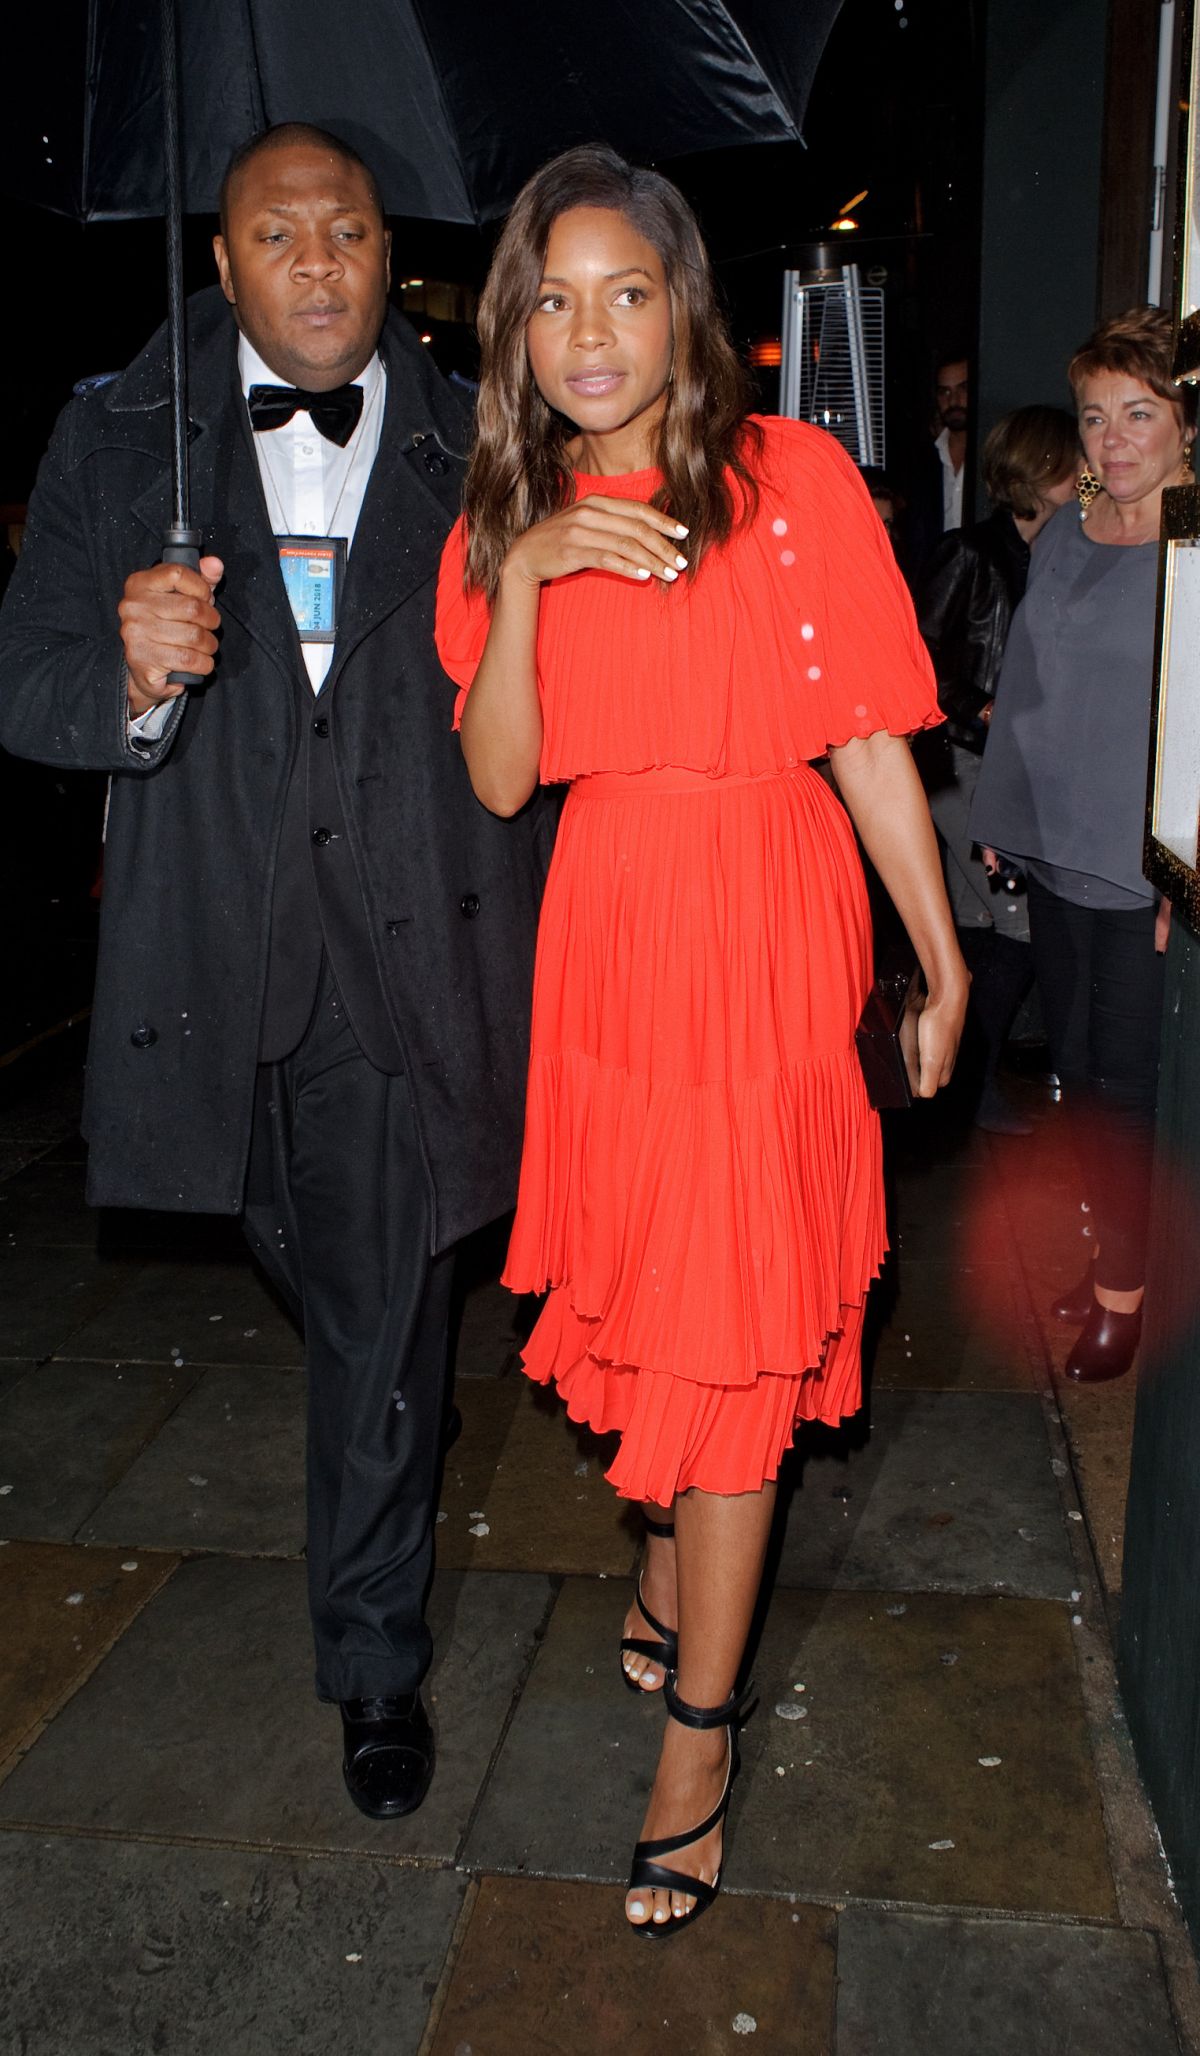 naomie-harris-leaves-a-restaurant-launch-party-in-london-04-27-2016_5.jpg